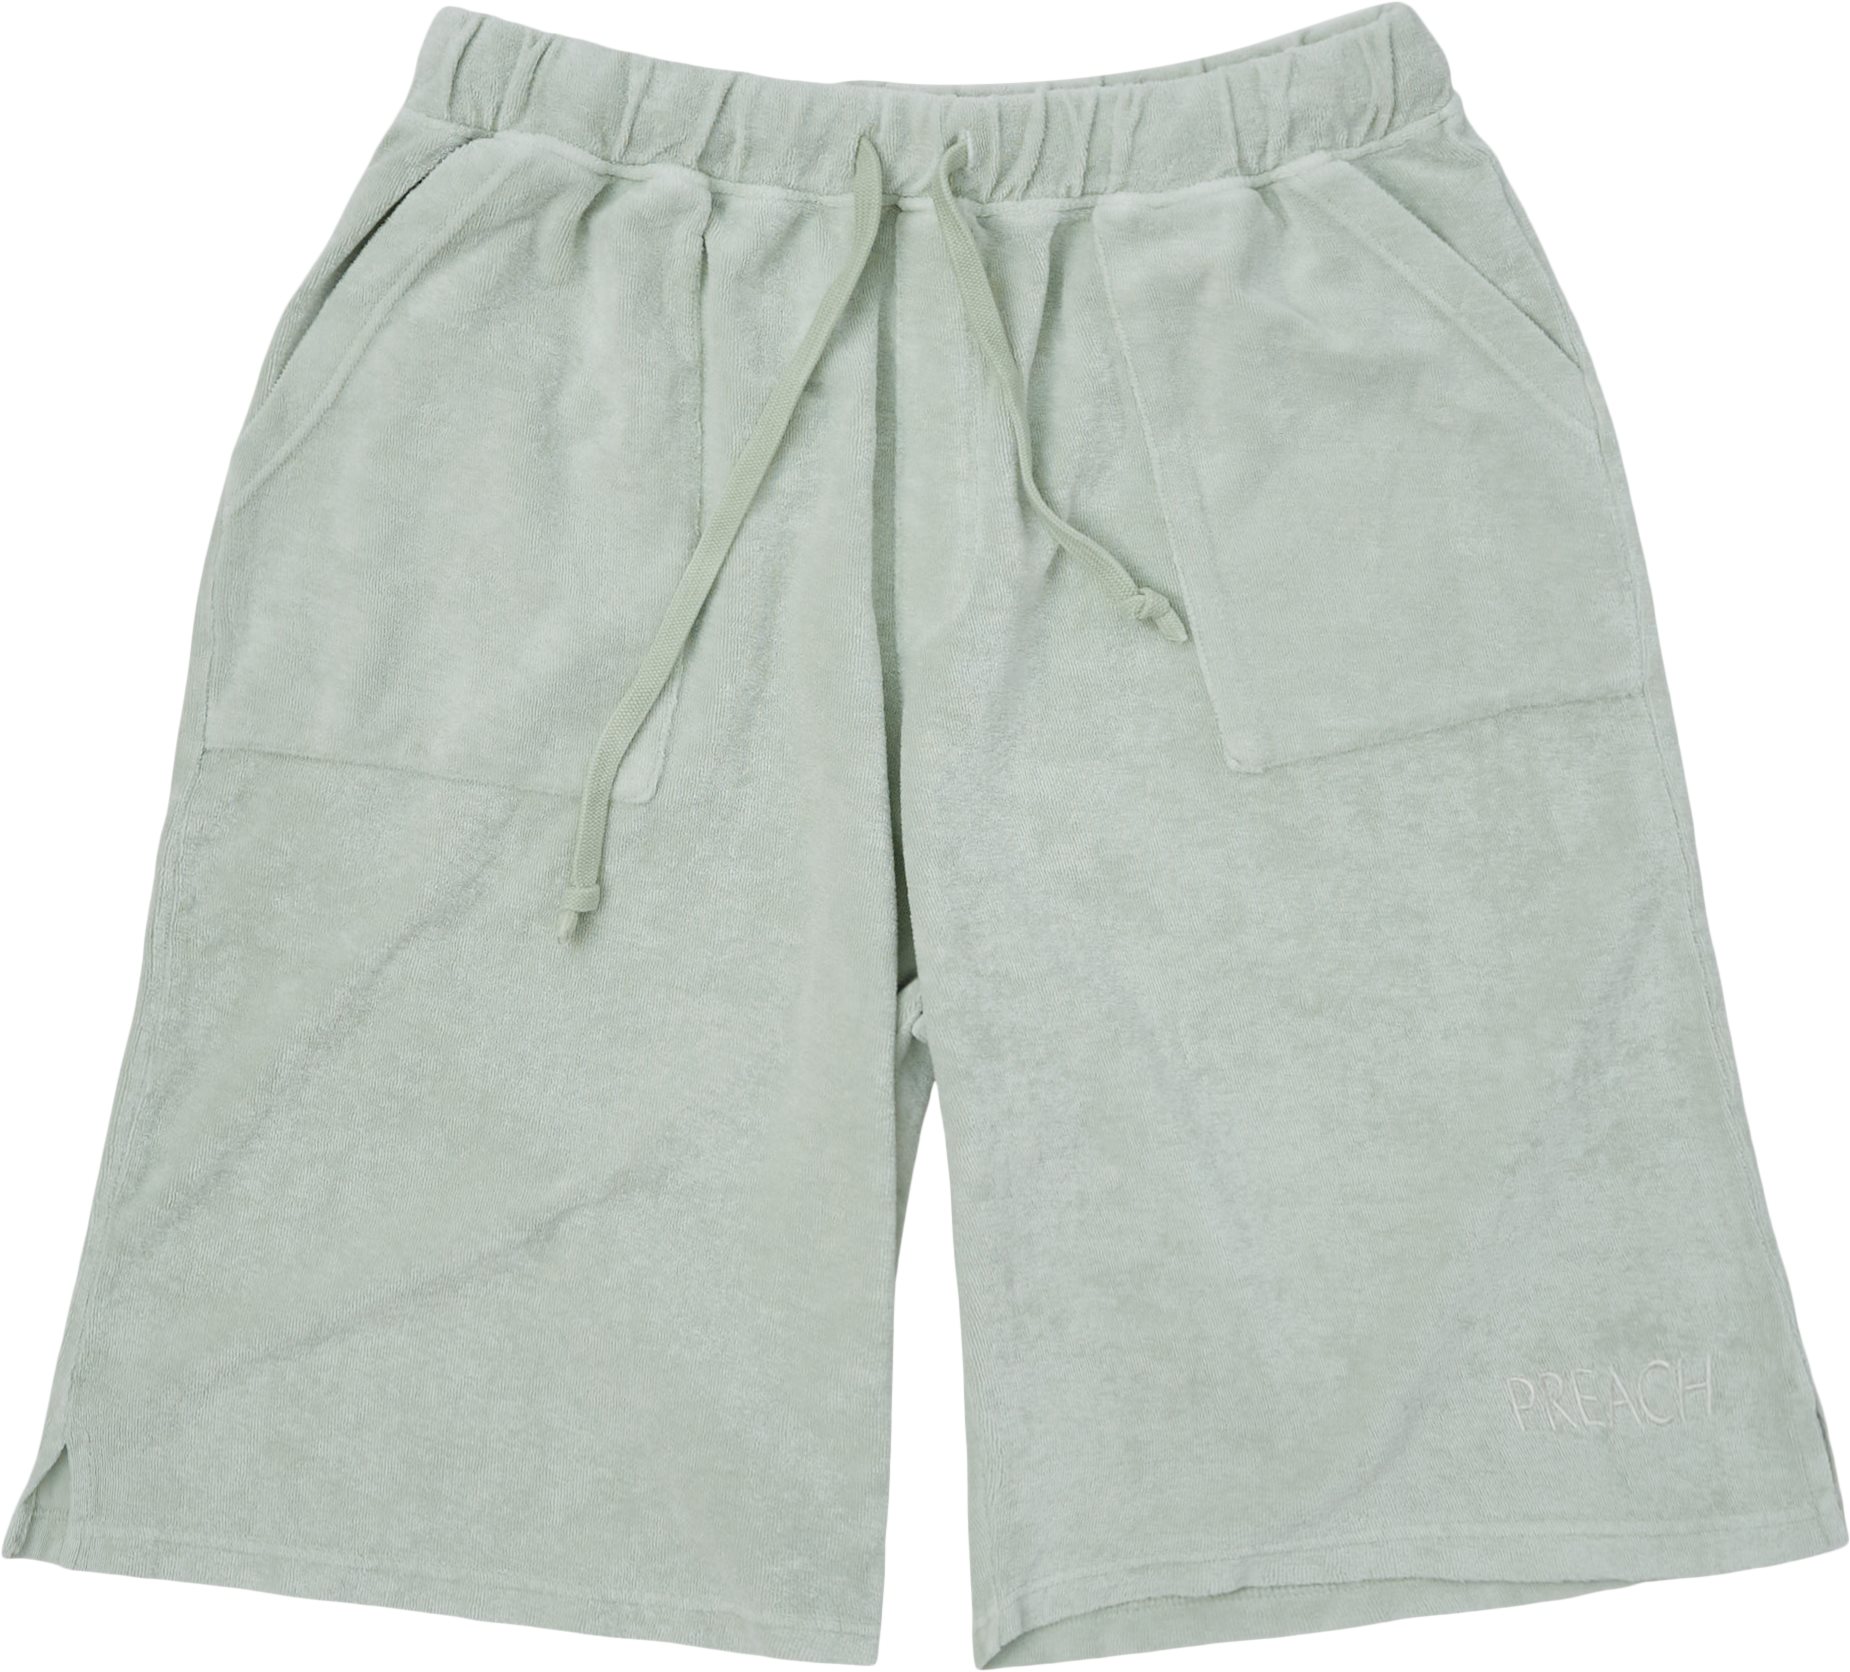 Long Frottee Shorts - Shorts - Loose fit - Grøn